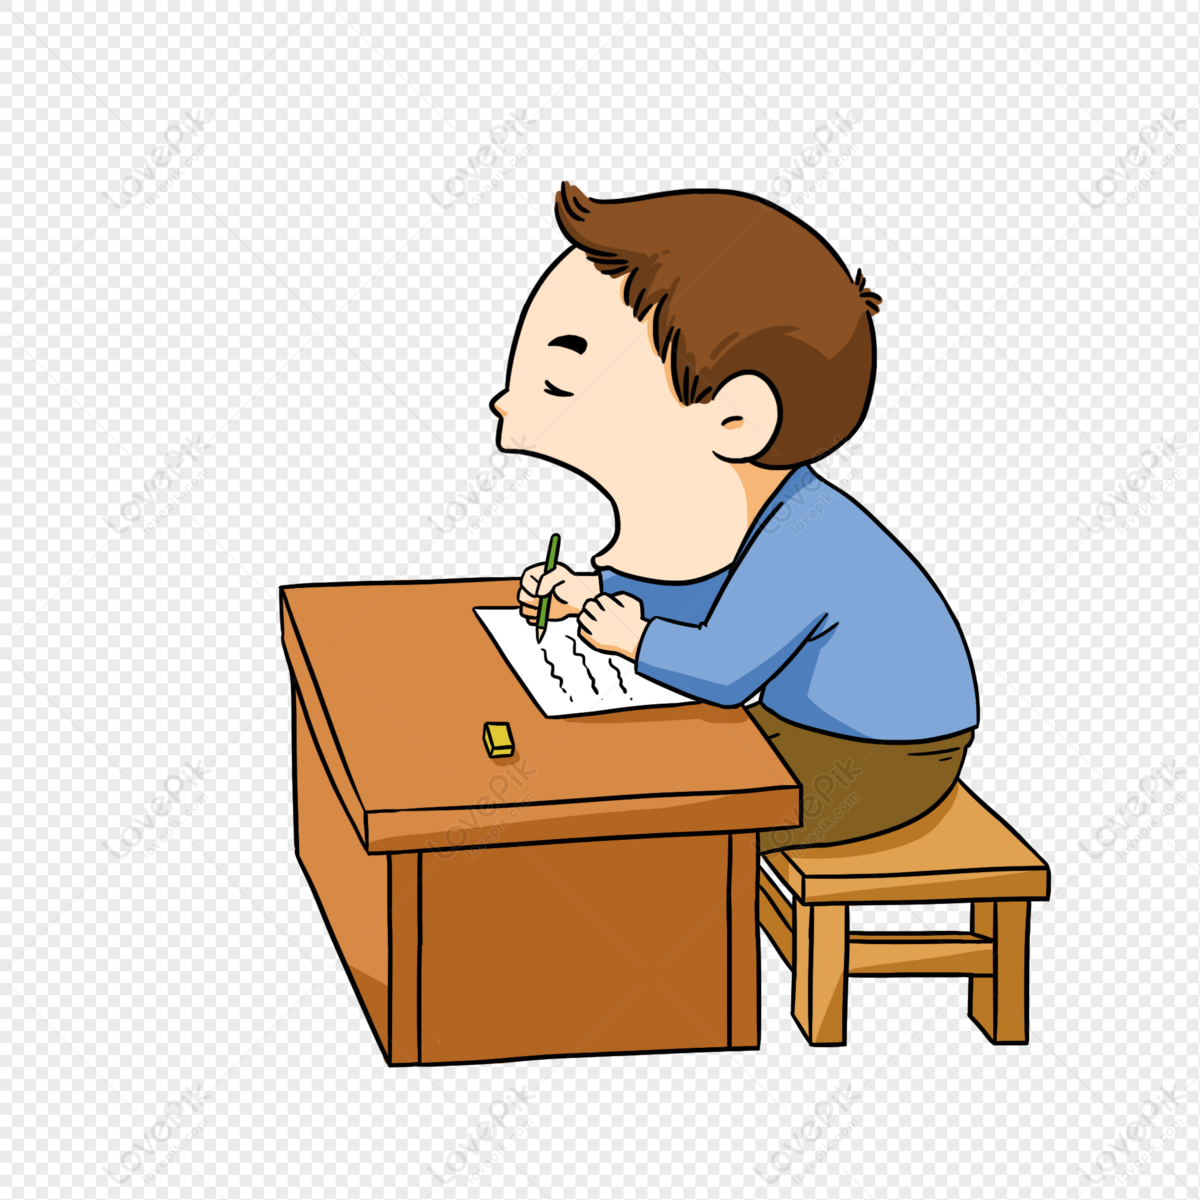 Primary school student writing homework, and homework, primary, study png transparent background